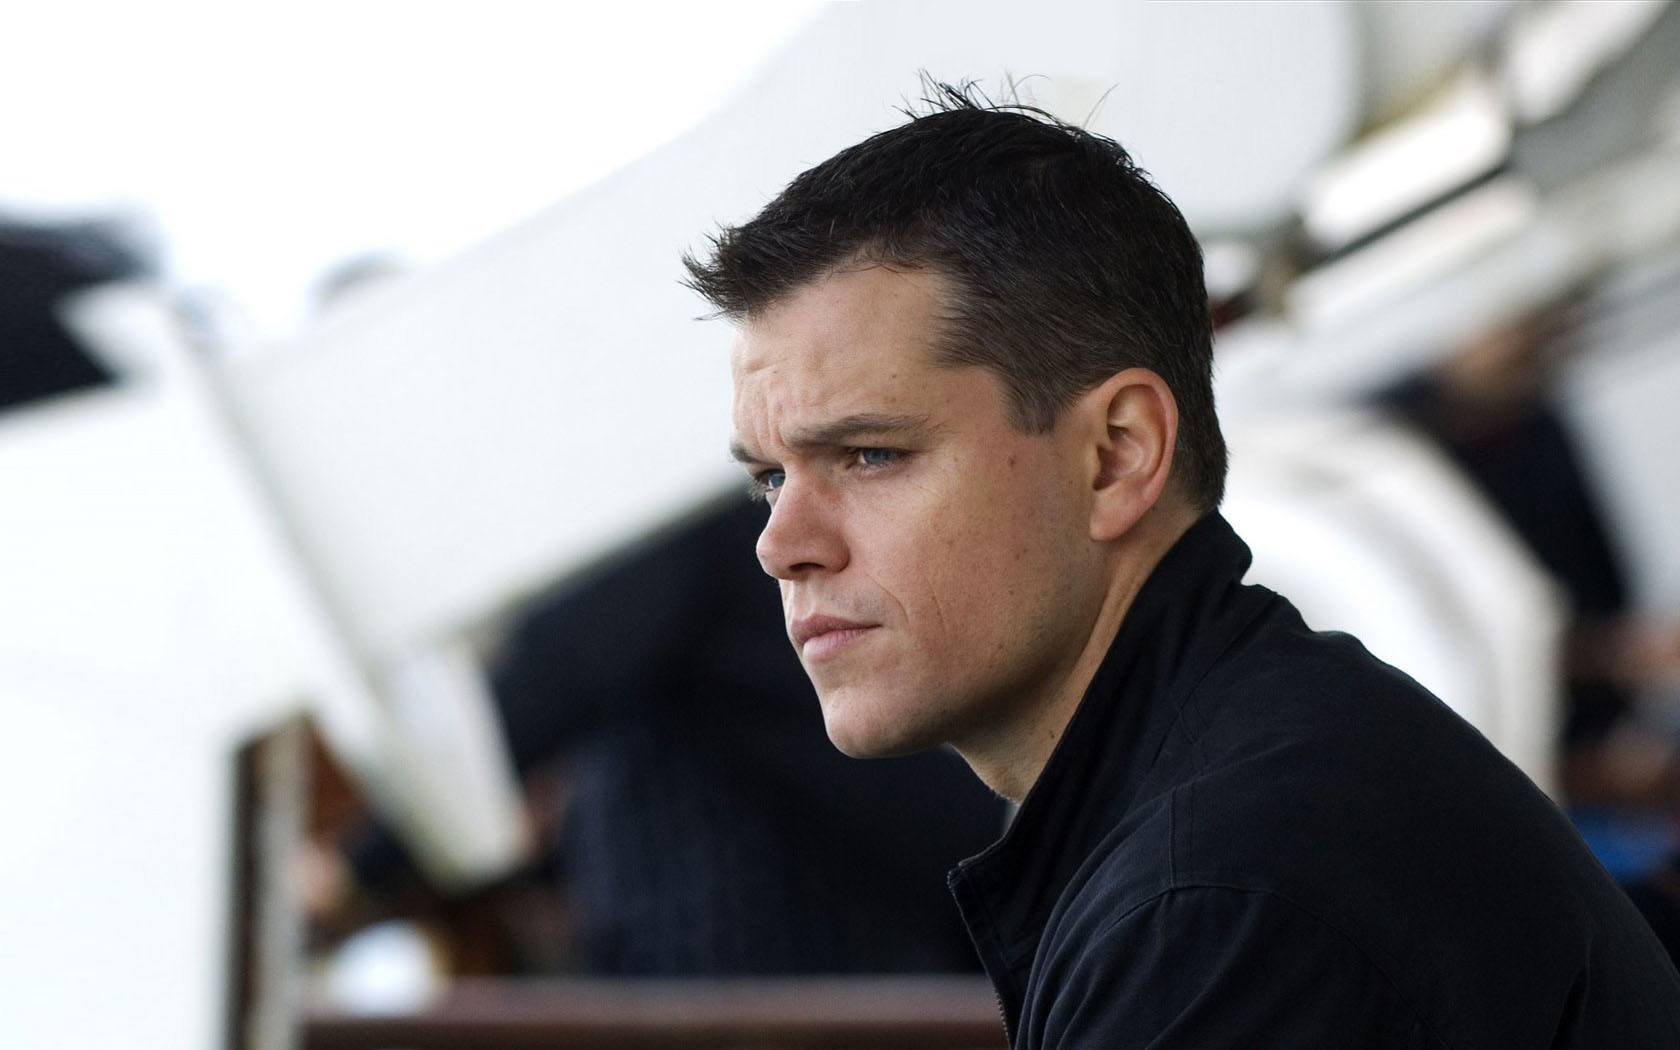 Chatting with us about Elysium, Matt Damon revealed that he was originally earmarked to play another sci-fi trooper in a certain ...